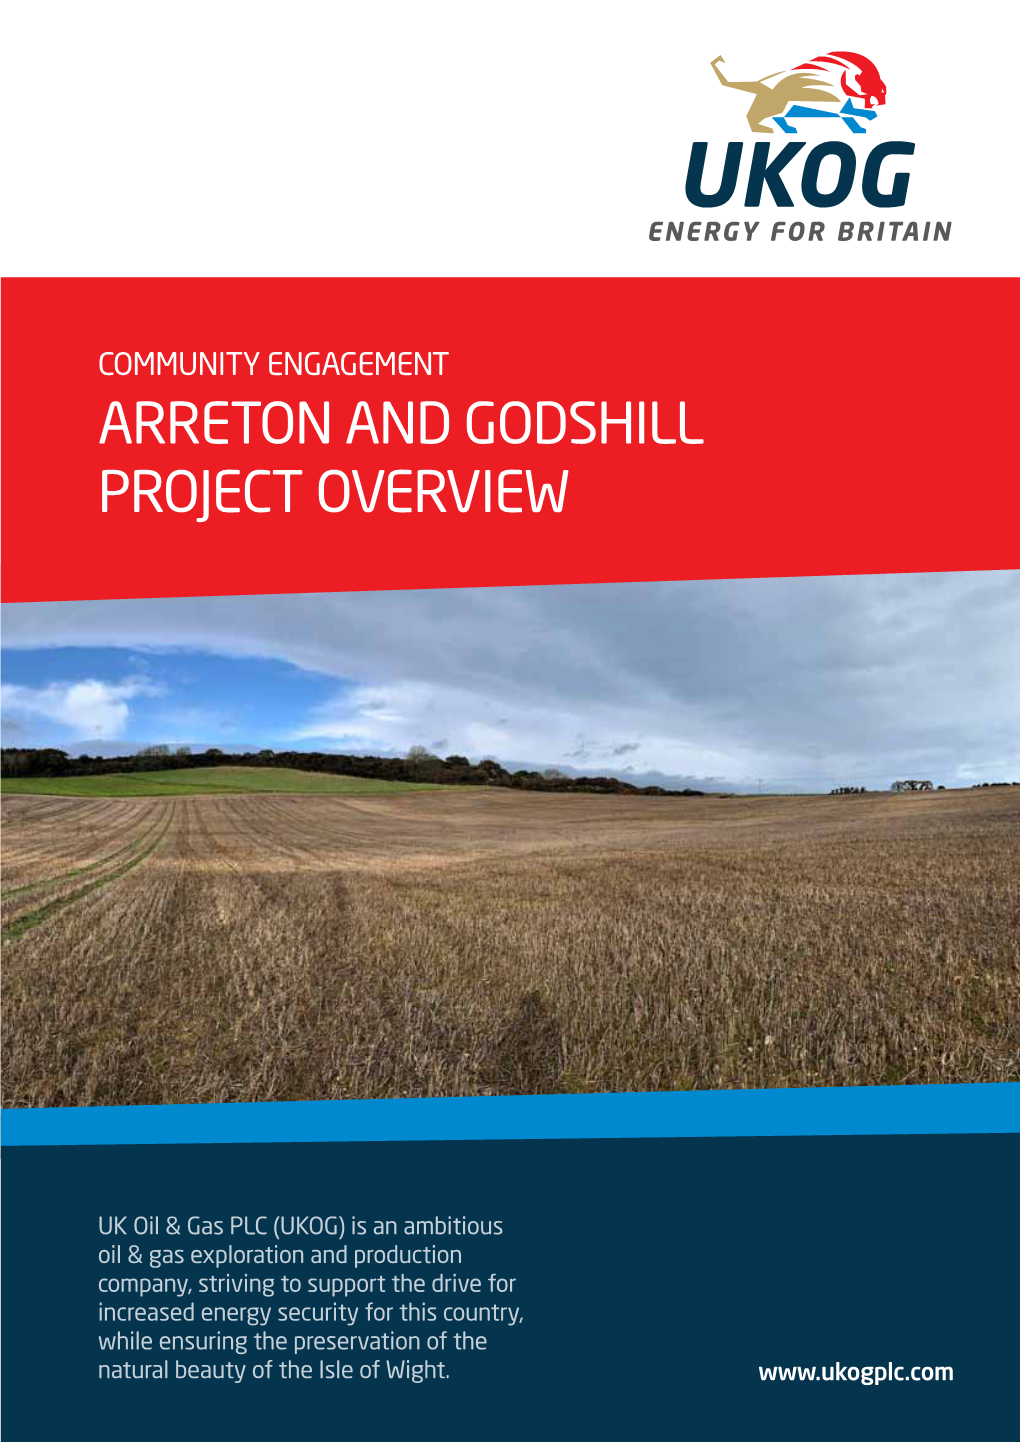 Arreton and Godshill Project Overview